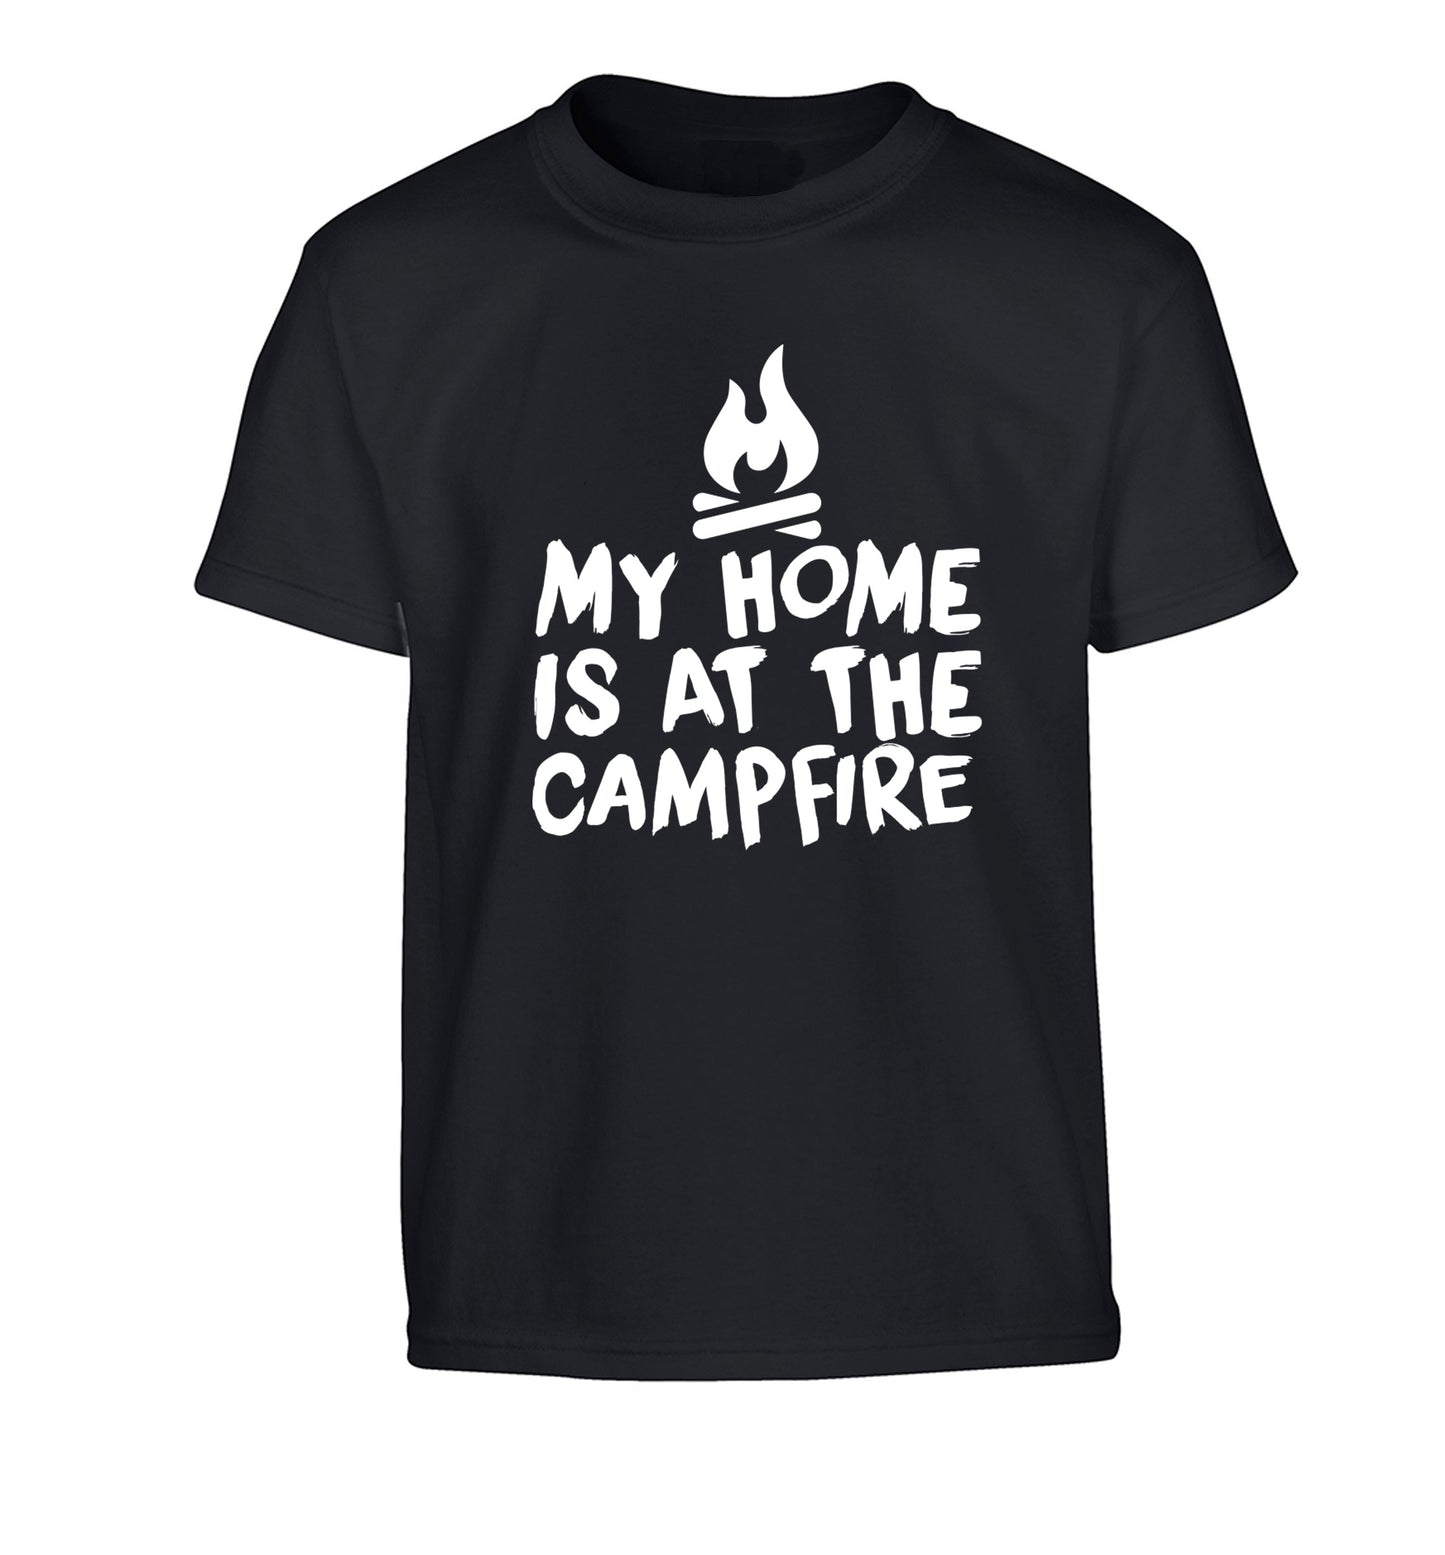 My home is at the campfire Children's black Tshirt 12-14 Years